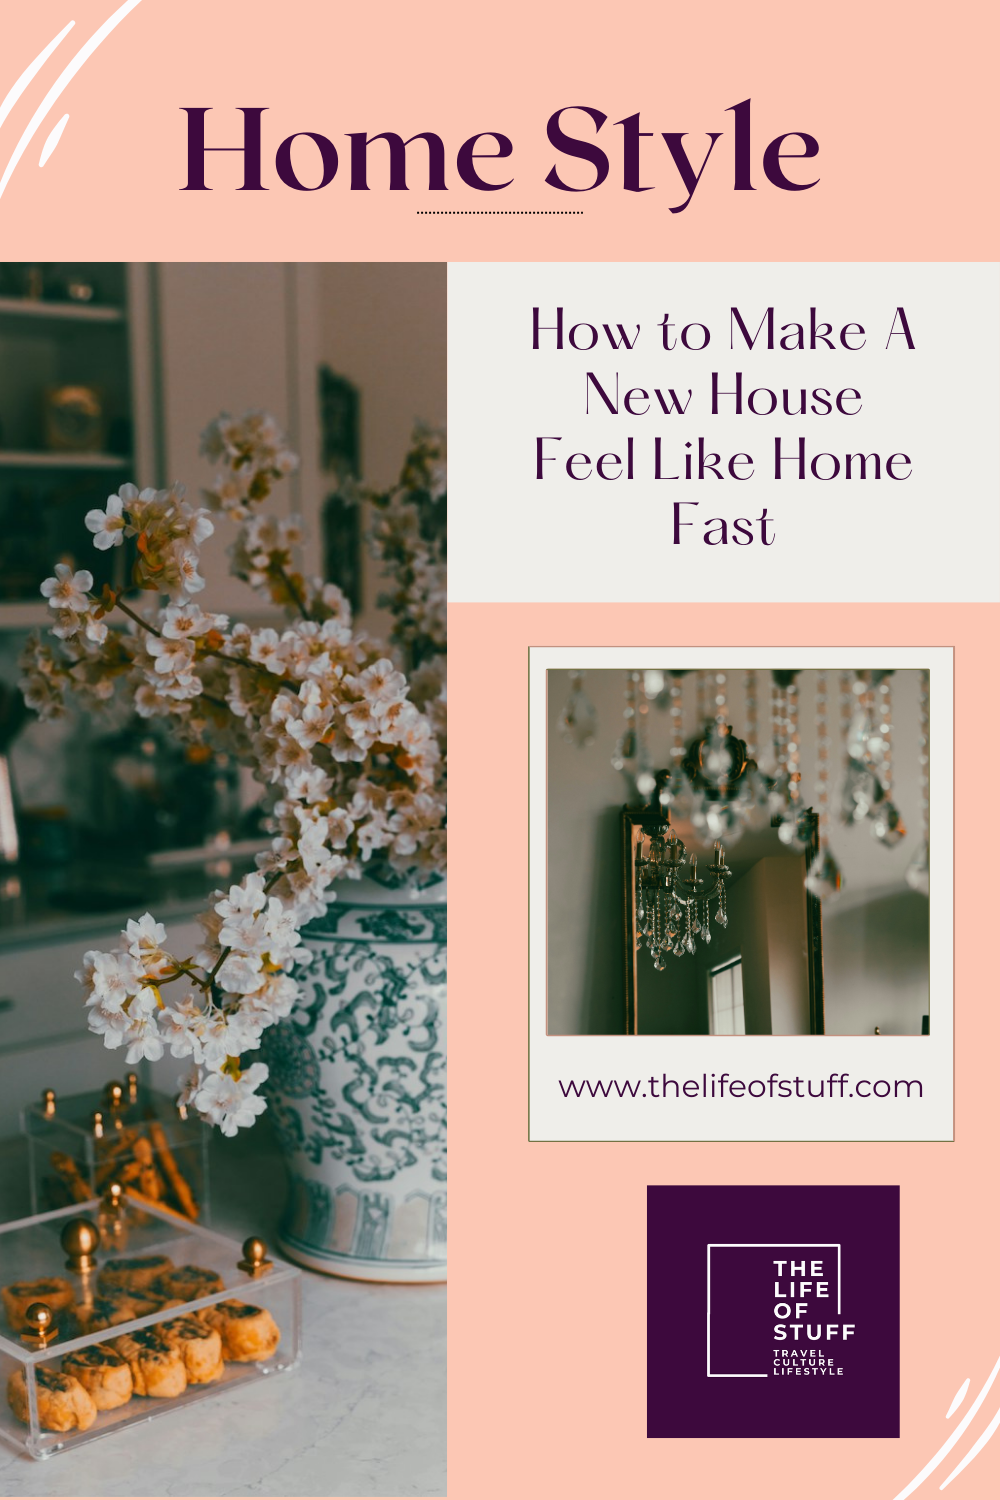 How to Make A New House Feel Like Home Fast - The Life of Stuff